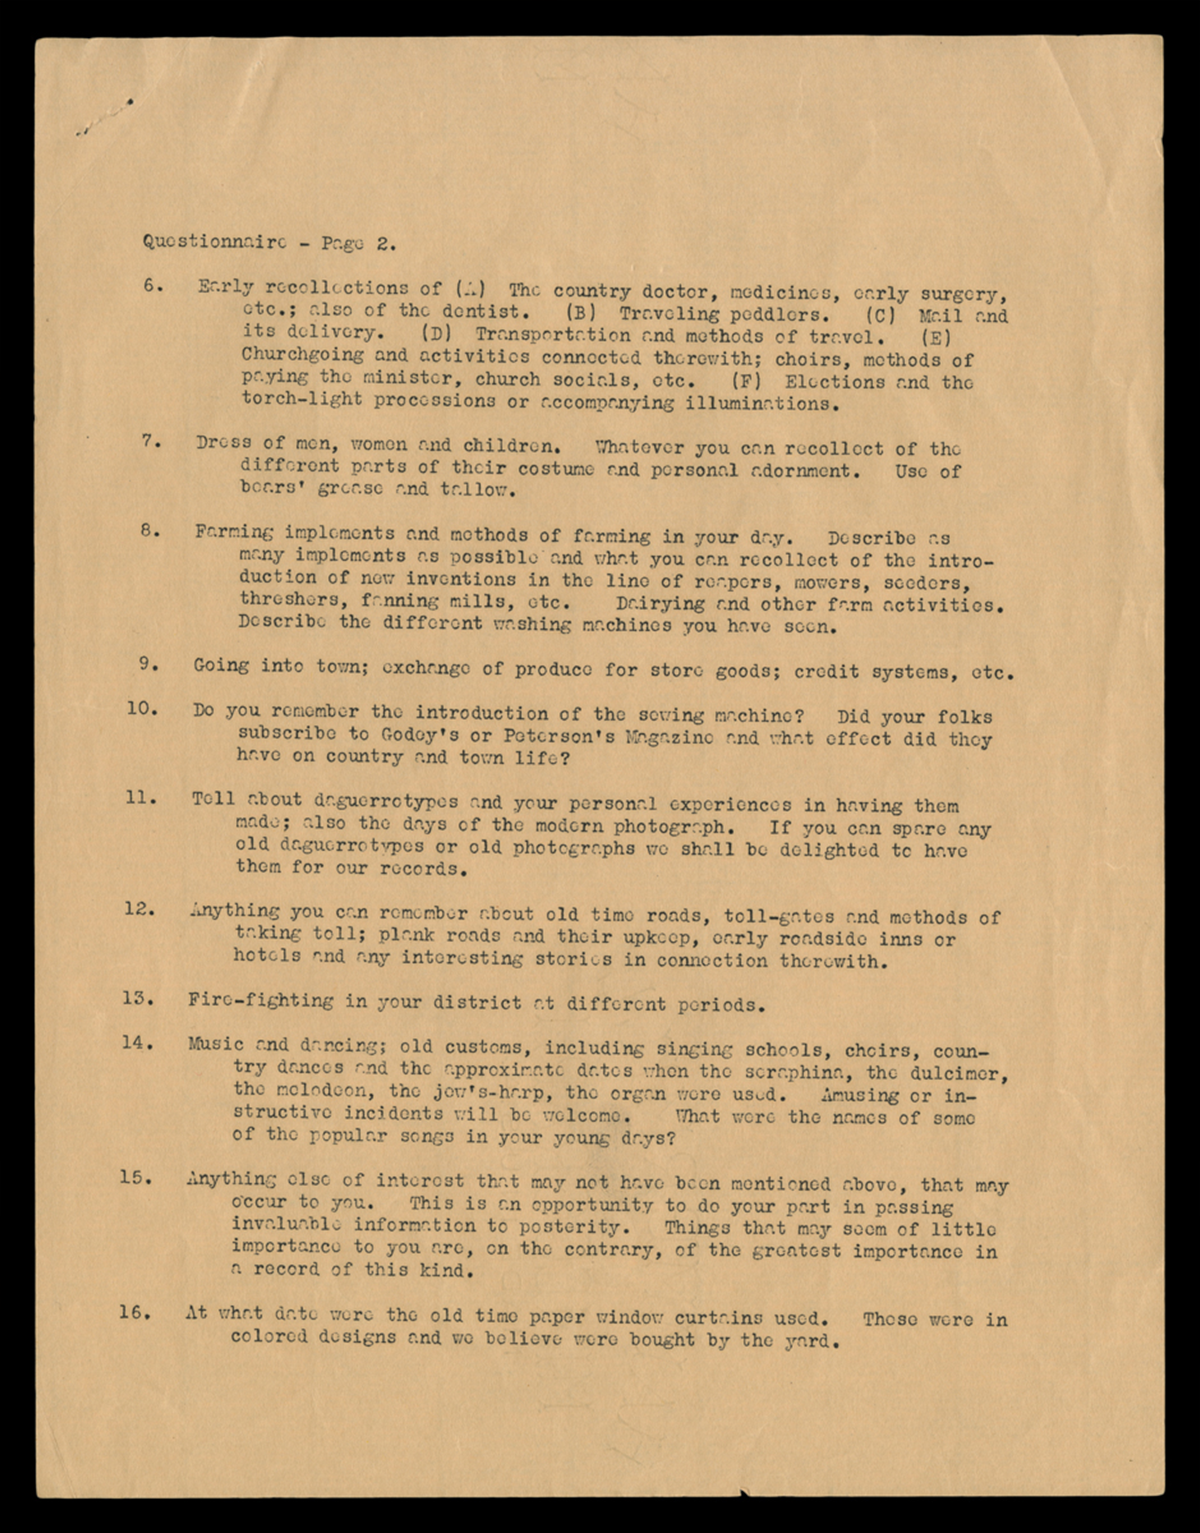 Questionnaire for Edison Institute Historical Records, 1929 (Page 2)